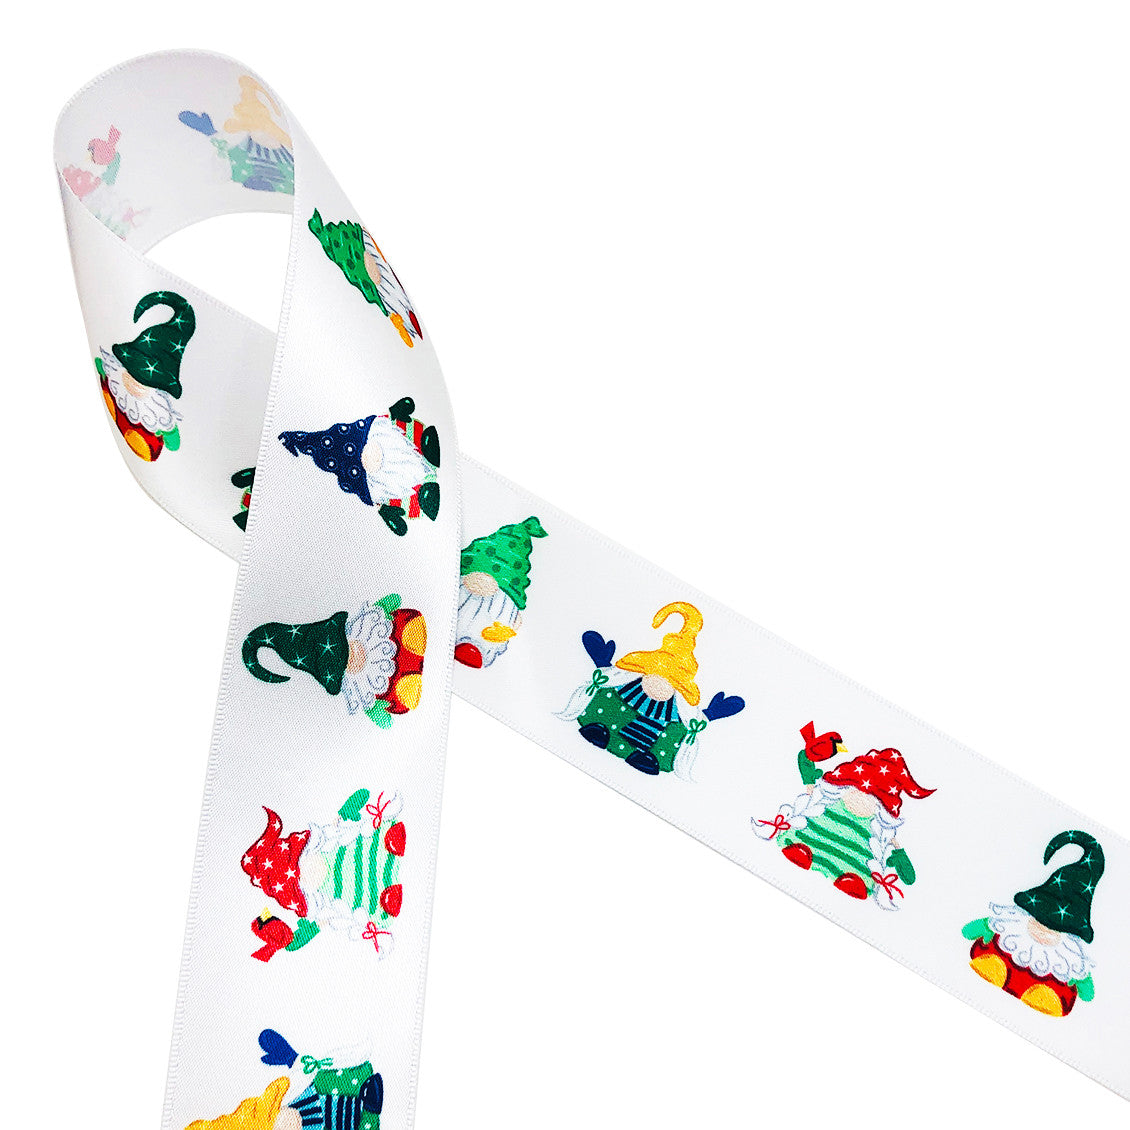 Sweet little Christmas gnomes with adorable little hats and Christmas outfits printed on 1.5" white single face satin ribbon is ideal for gift wrap, decor, treat bags, Christmas cookies and crafts. Our ribbon is designed and printed in the USA